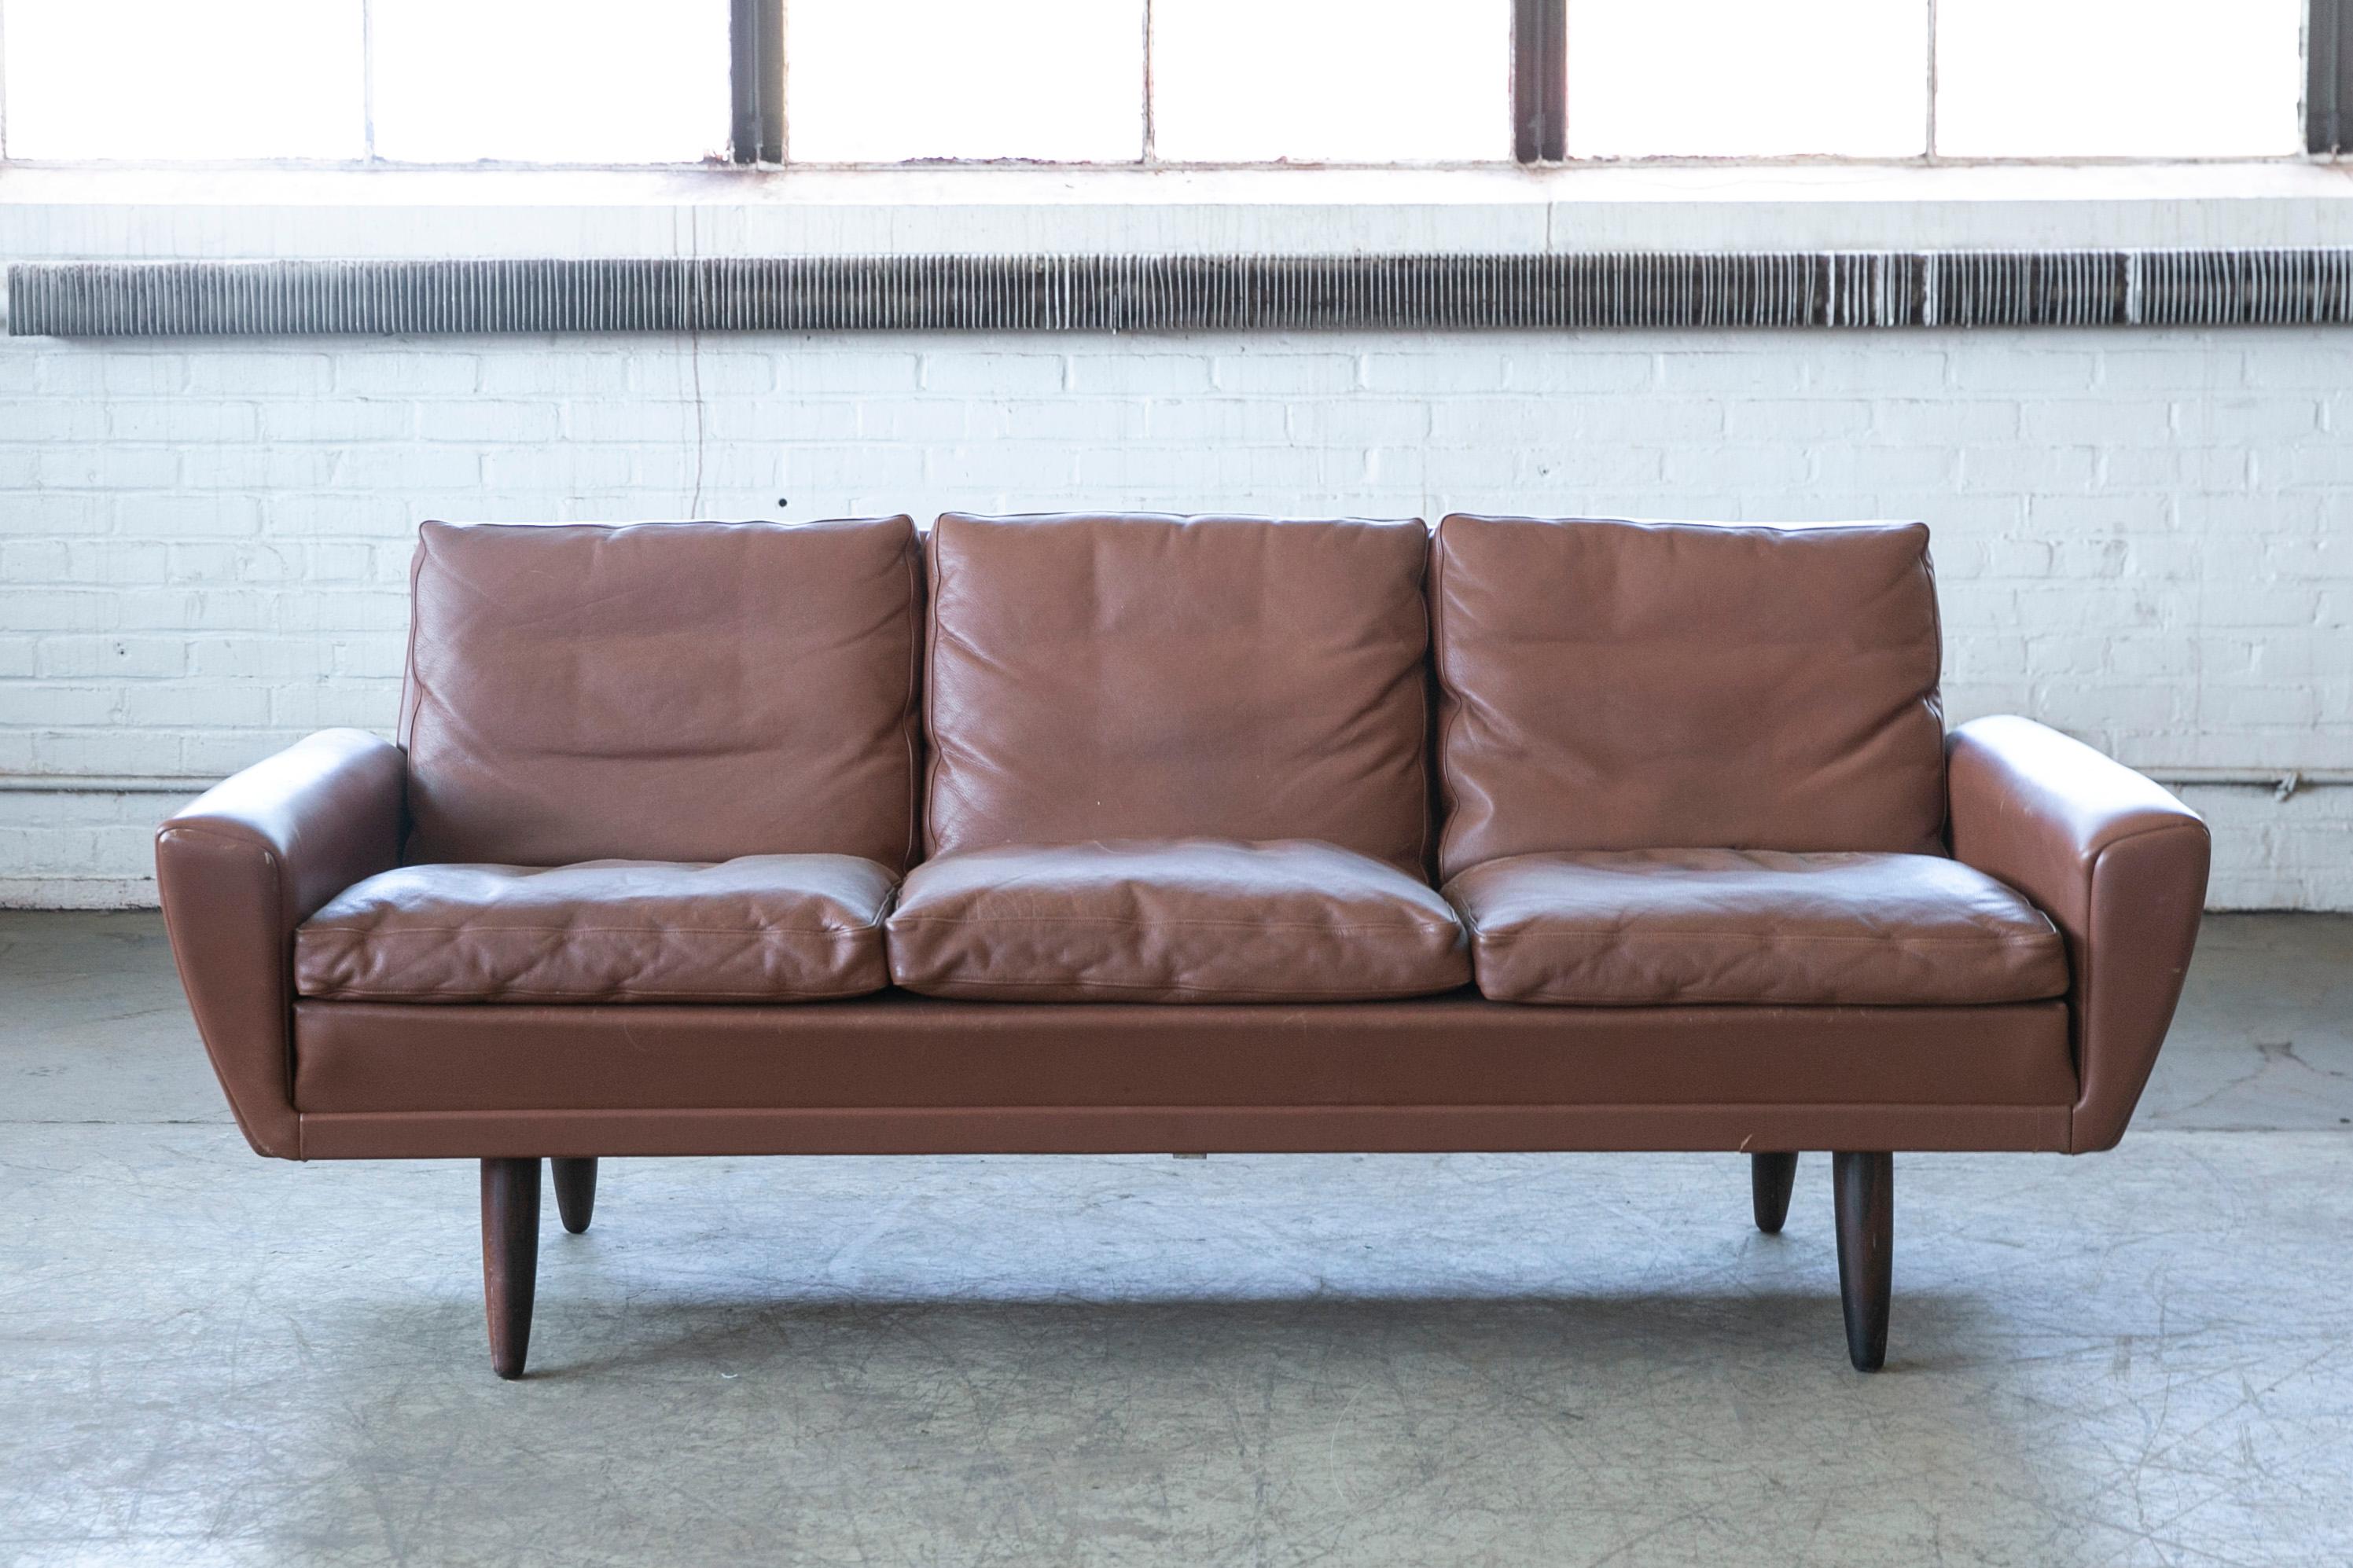 Mid-20th Century Danish Mid-Century Sofa in Cappuccino Colored Leather by Kurt Ostervig